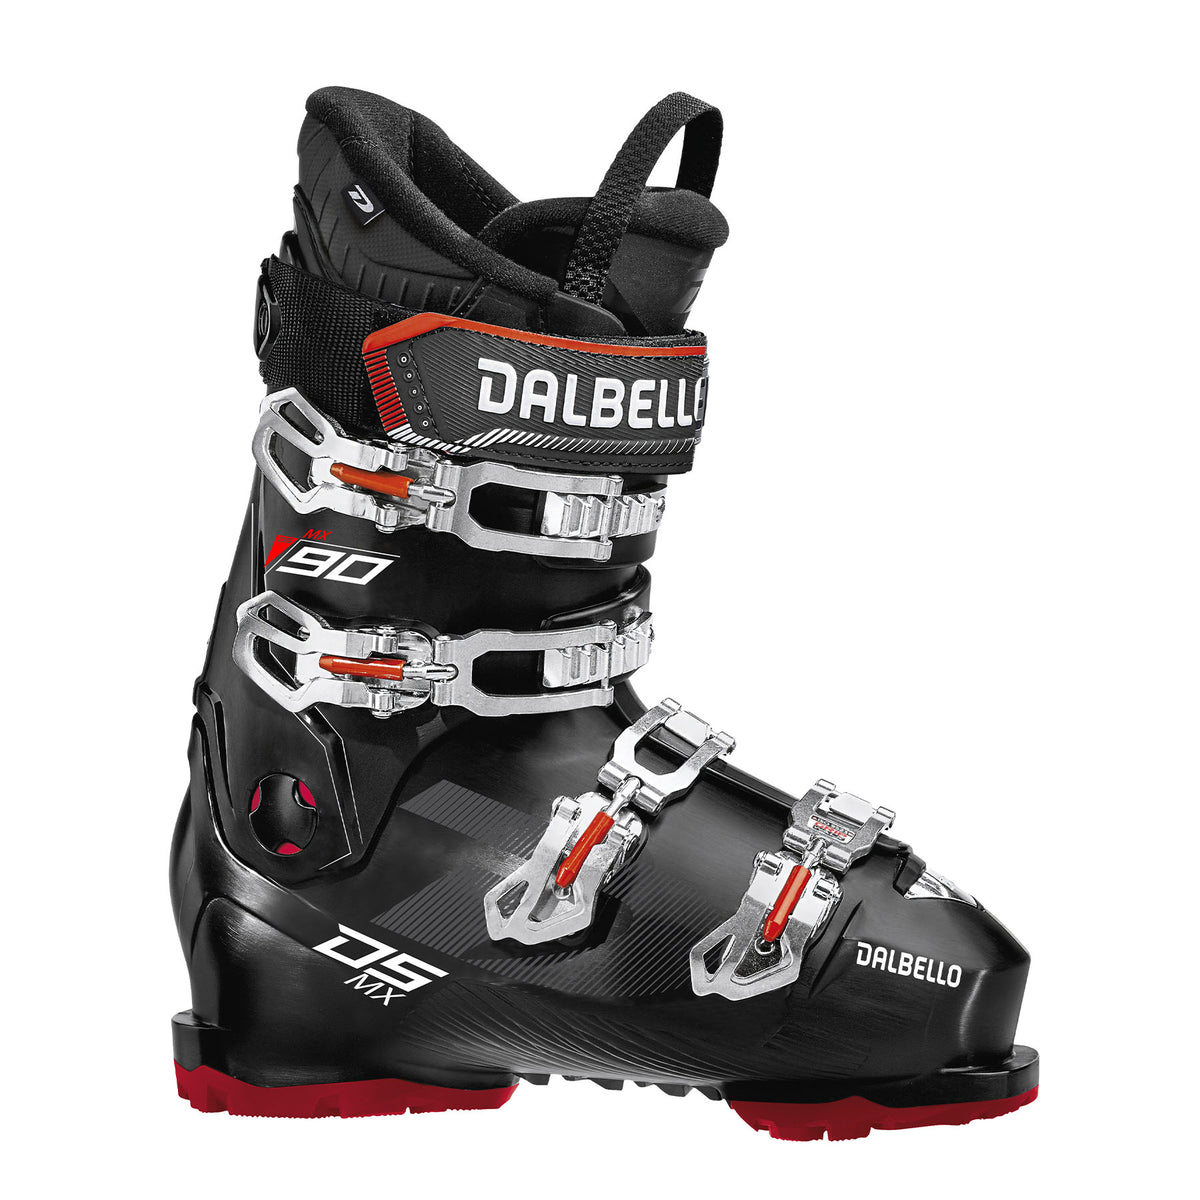 Hero image featuring a side angle photo of the Dalbello DS MX 90 ski boot in black with silver buckles and red trim.